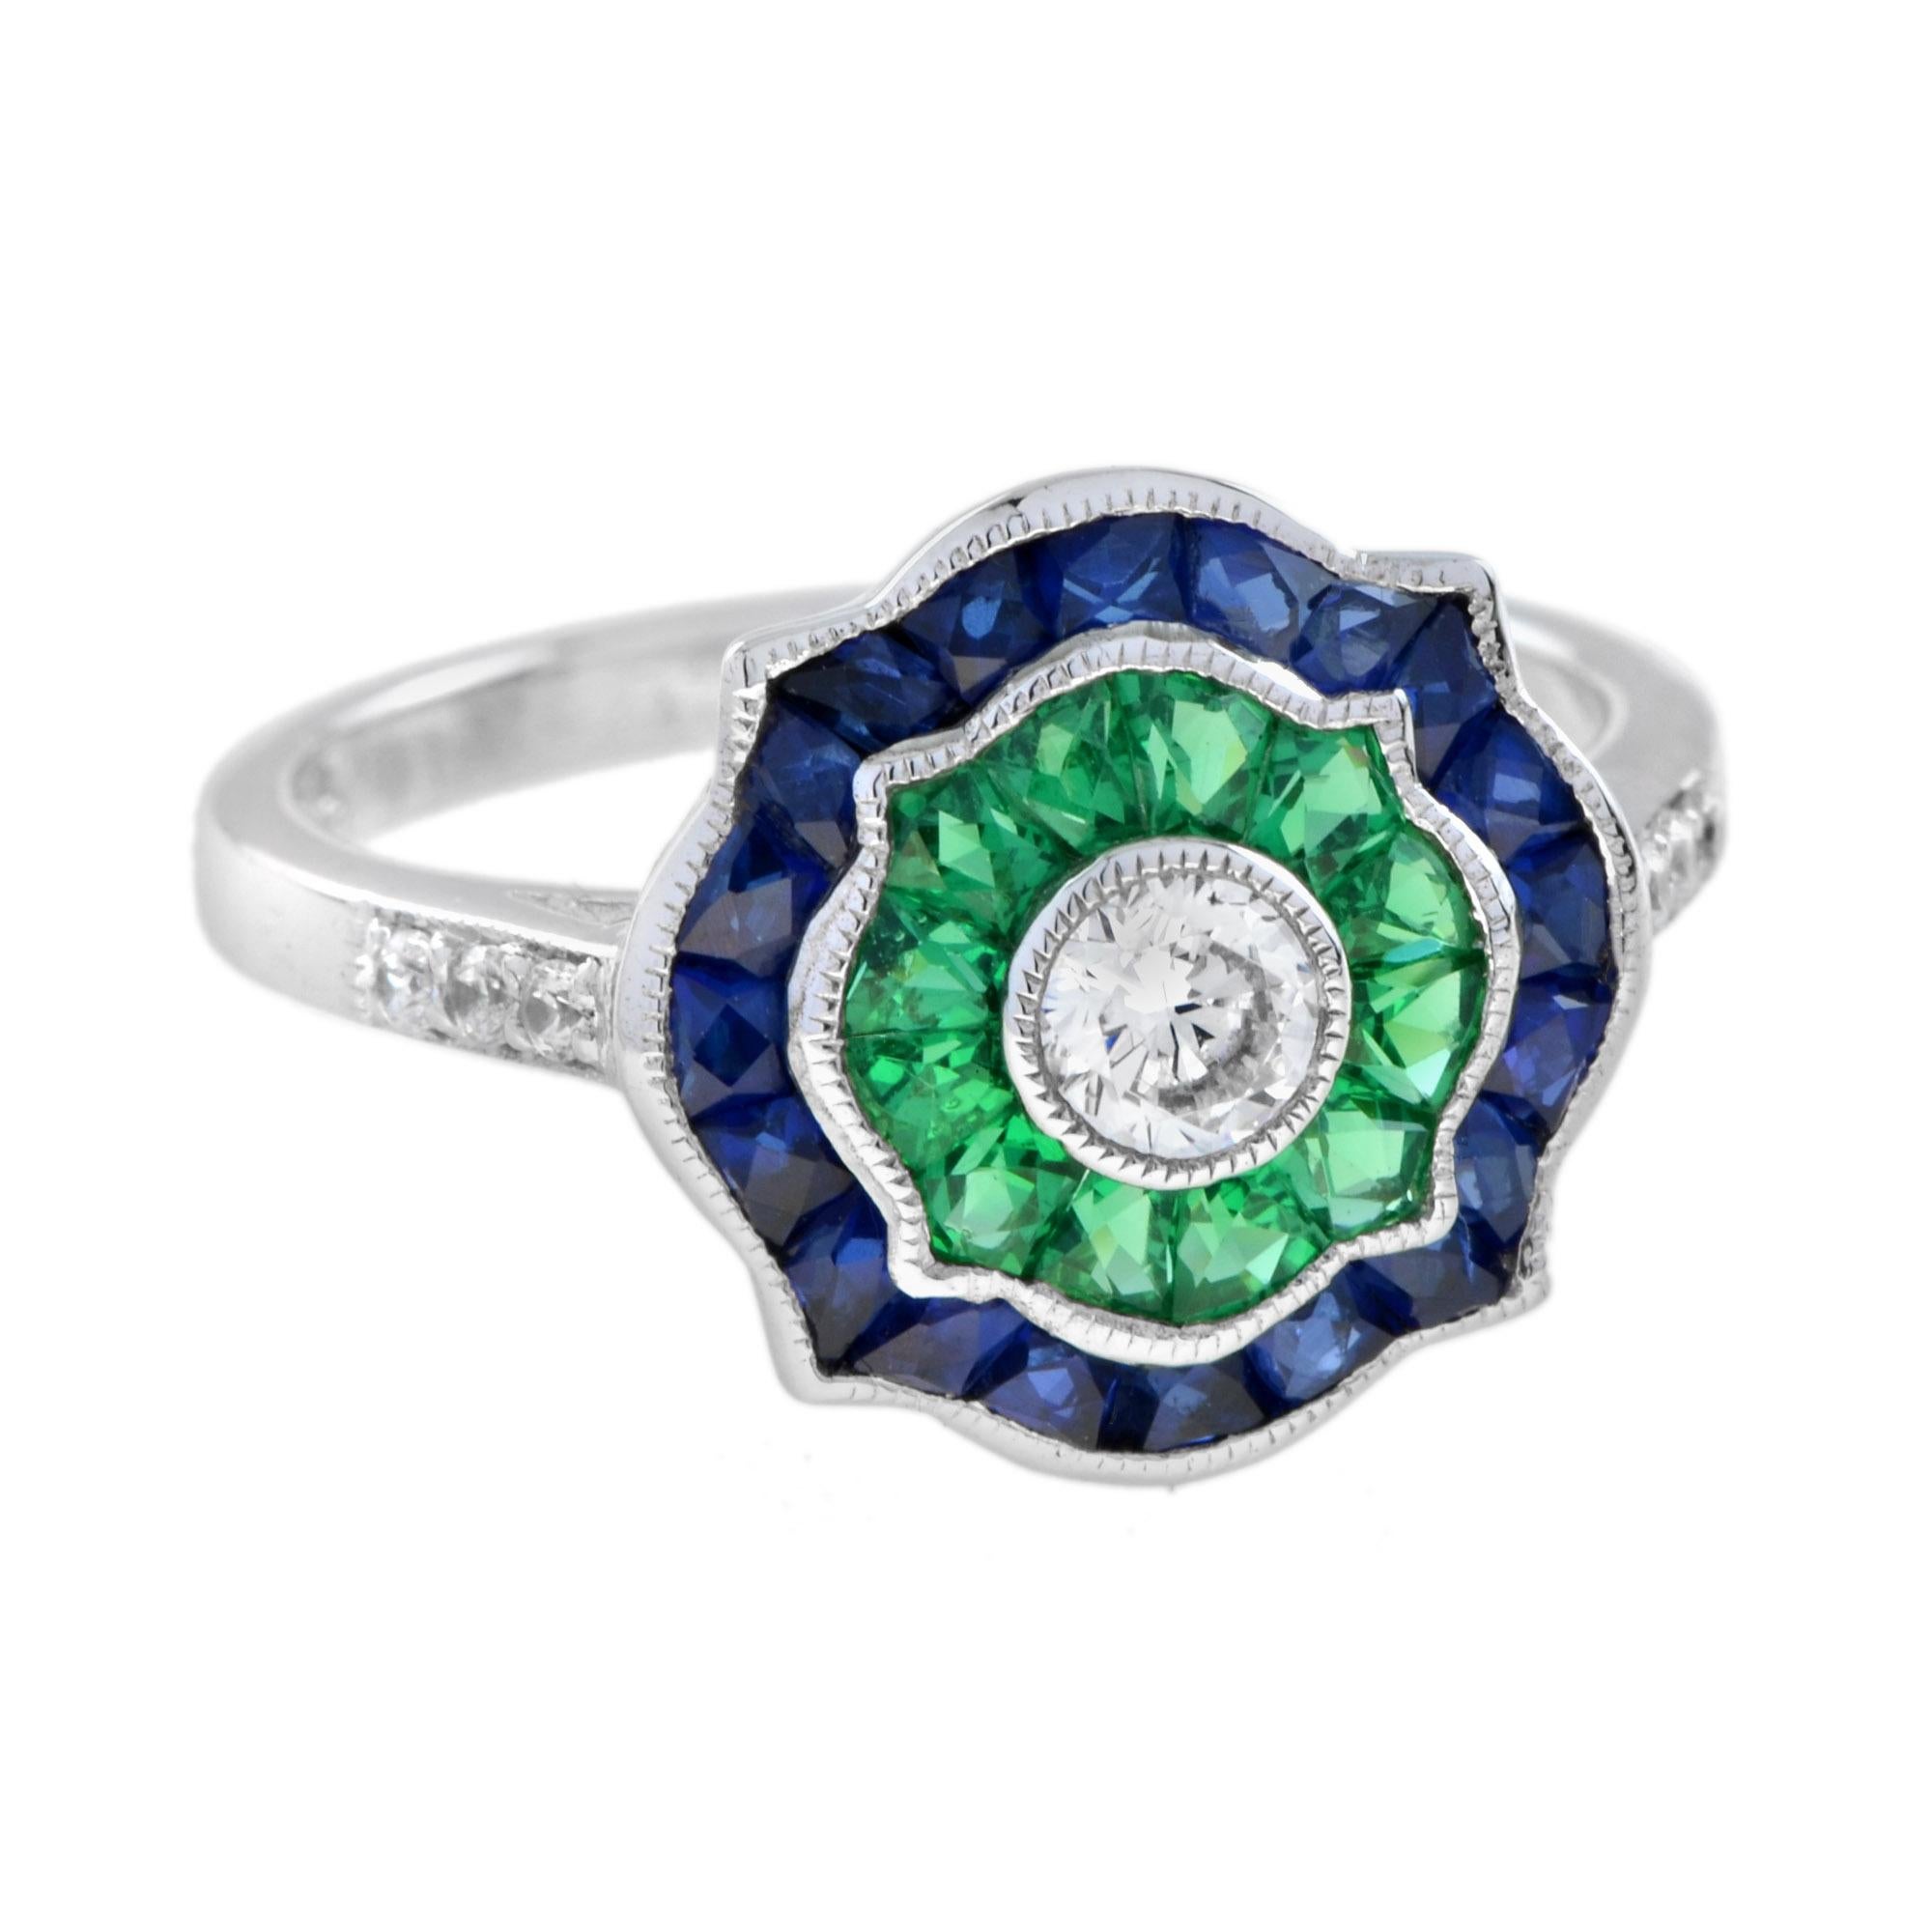 This lovely target ring boasts a center diamond weighing 0.25 carat. The center diamond is encircled by French-cut emeralds and sapphires. In addition to the emerald-sapphire halo. Whether you are looking for a dress ring, or an engagement ring with